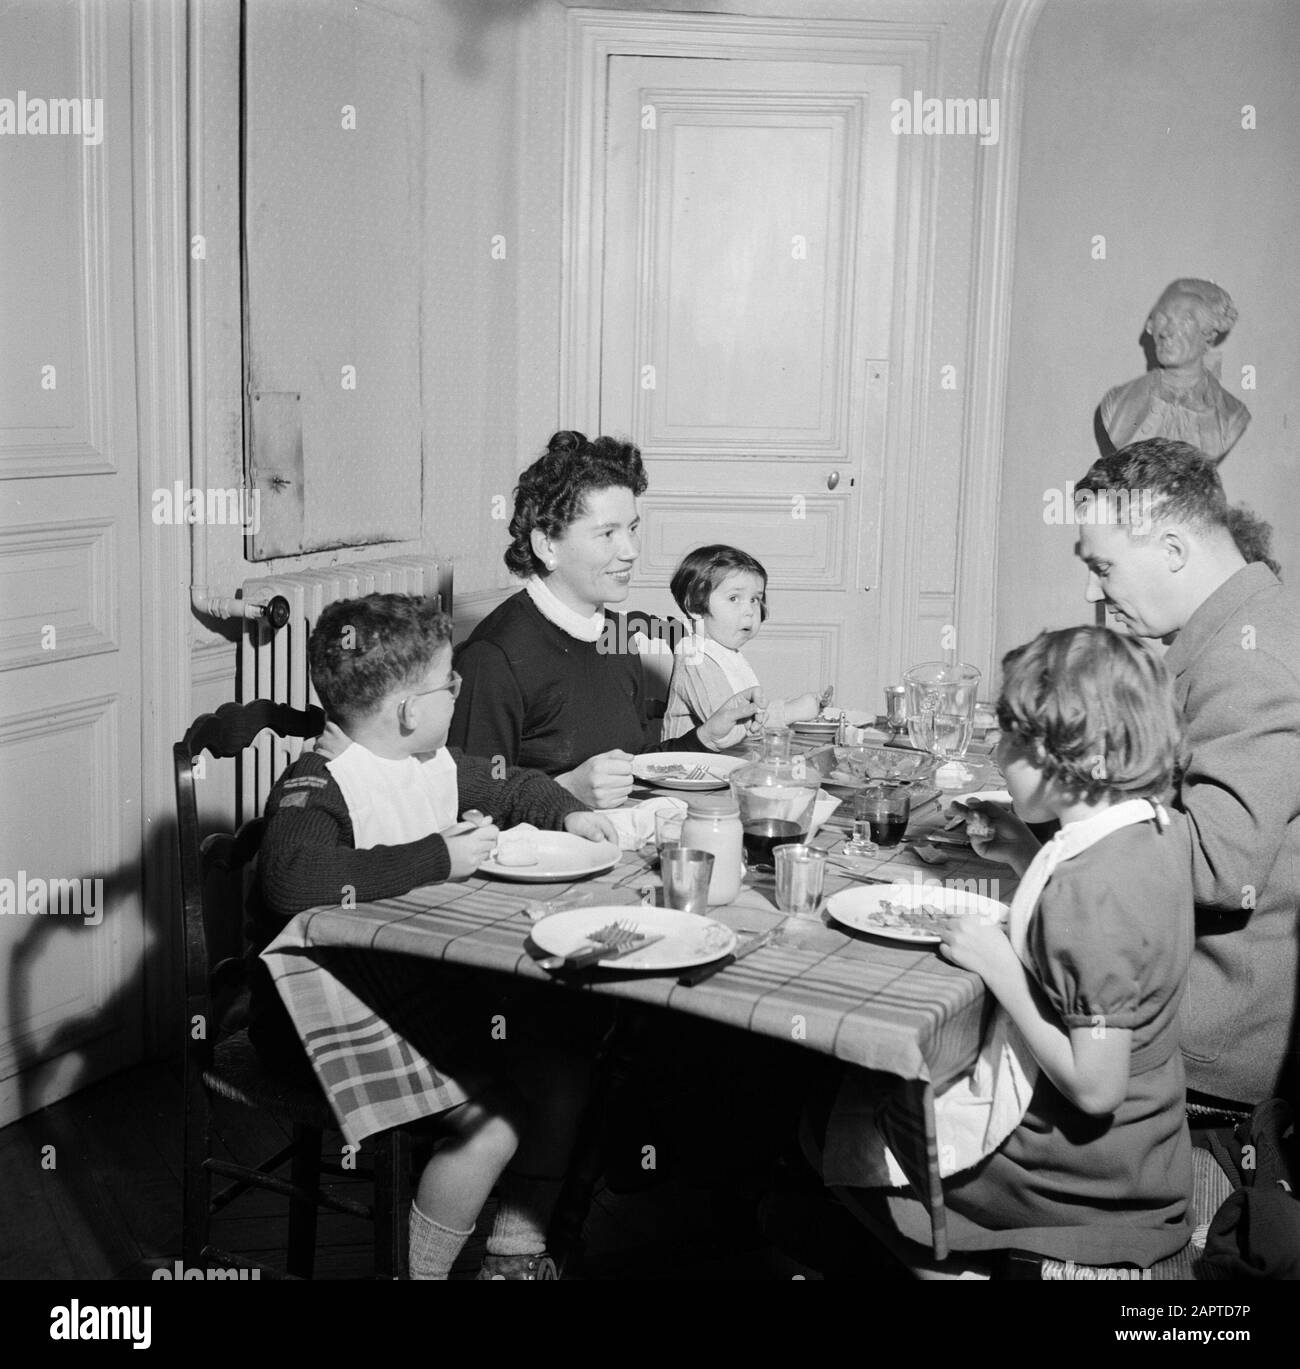 Residents of an apartment building in Paris  Family at the table during the meal Date: 1950 Location: France, Paris Keywords: families, children, meals, crockery, tables Stock Photo